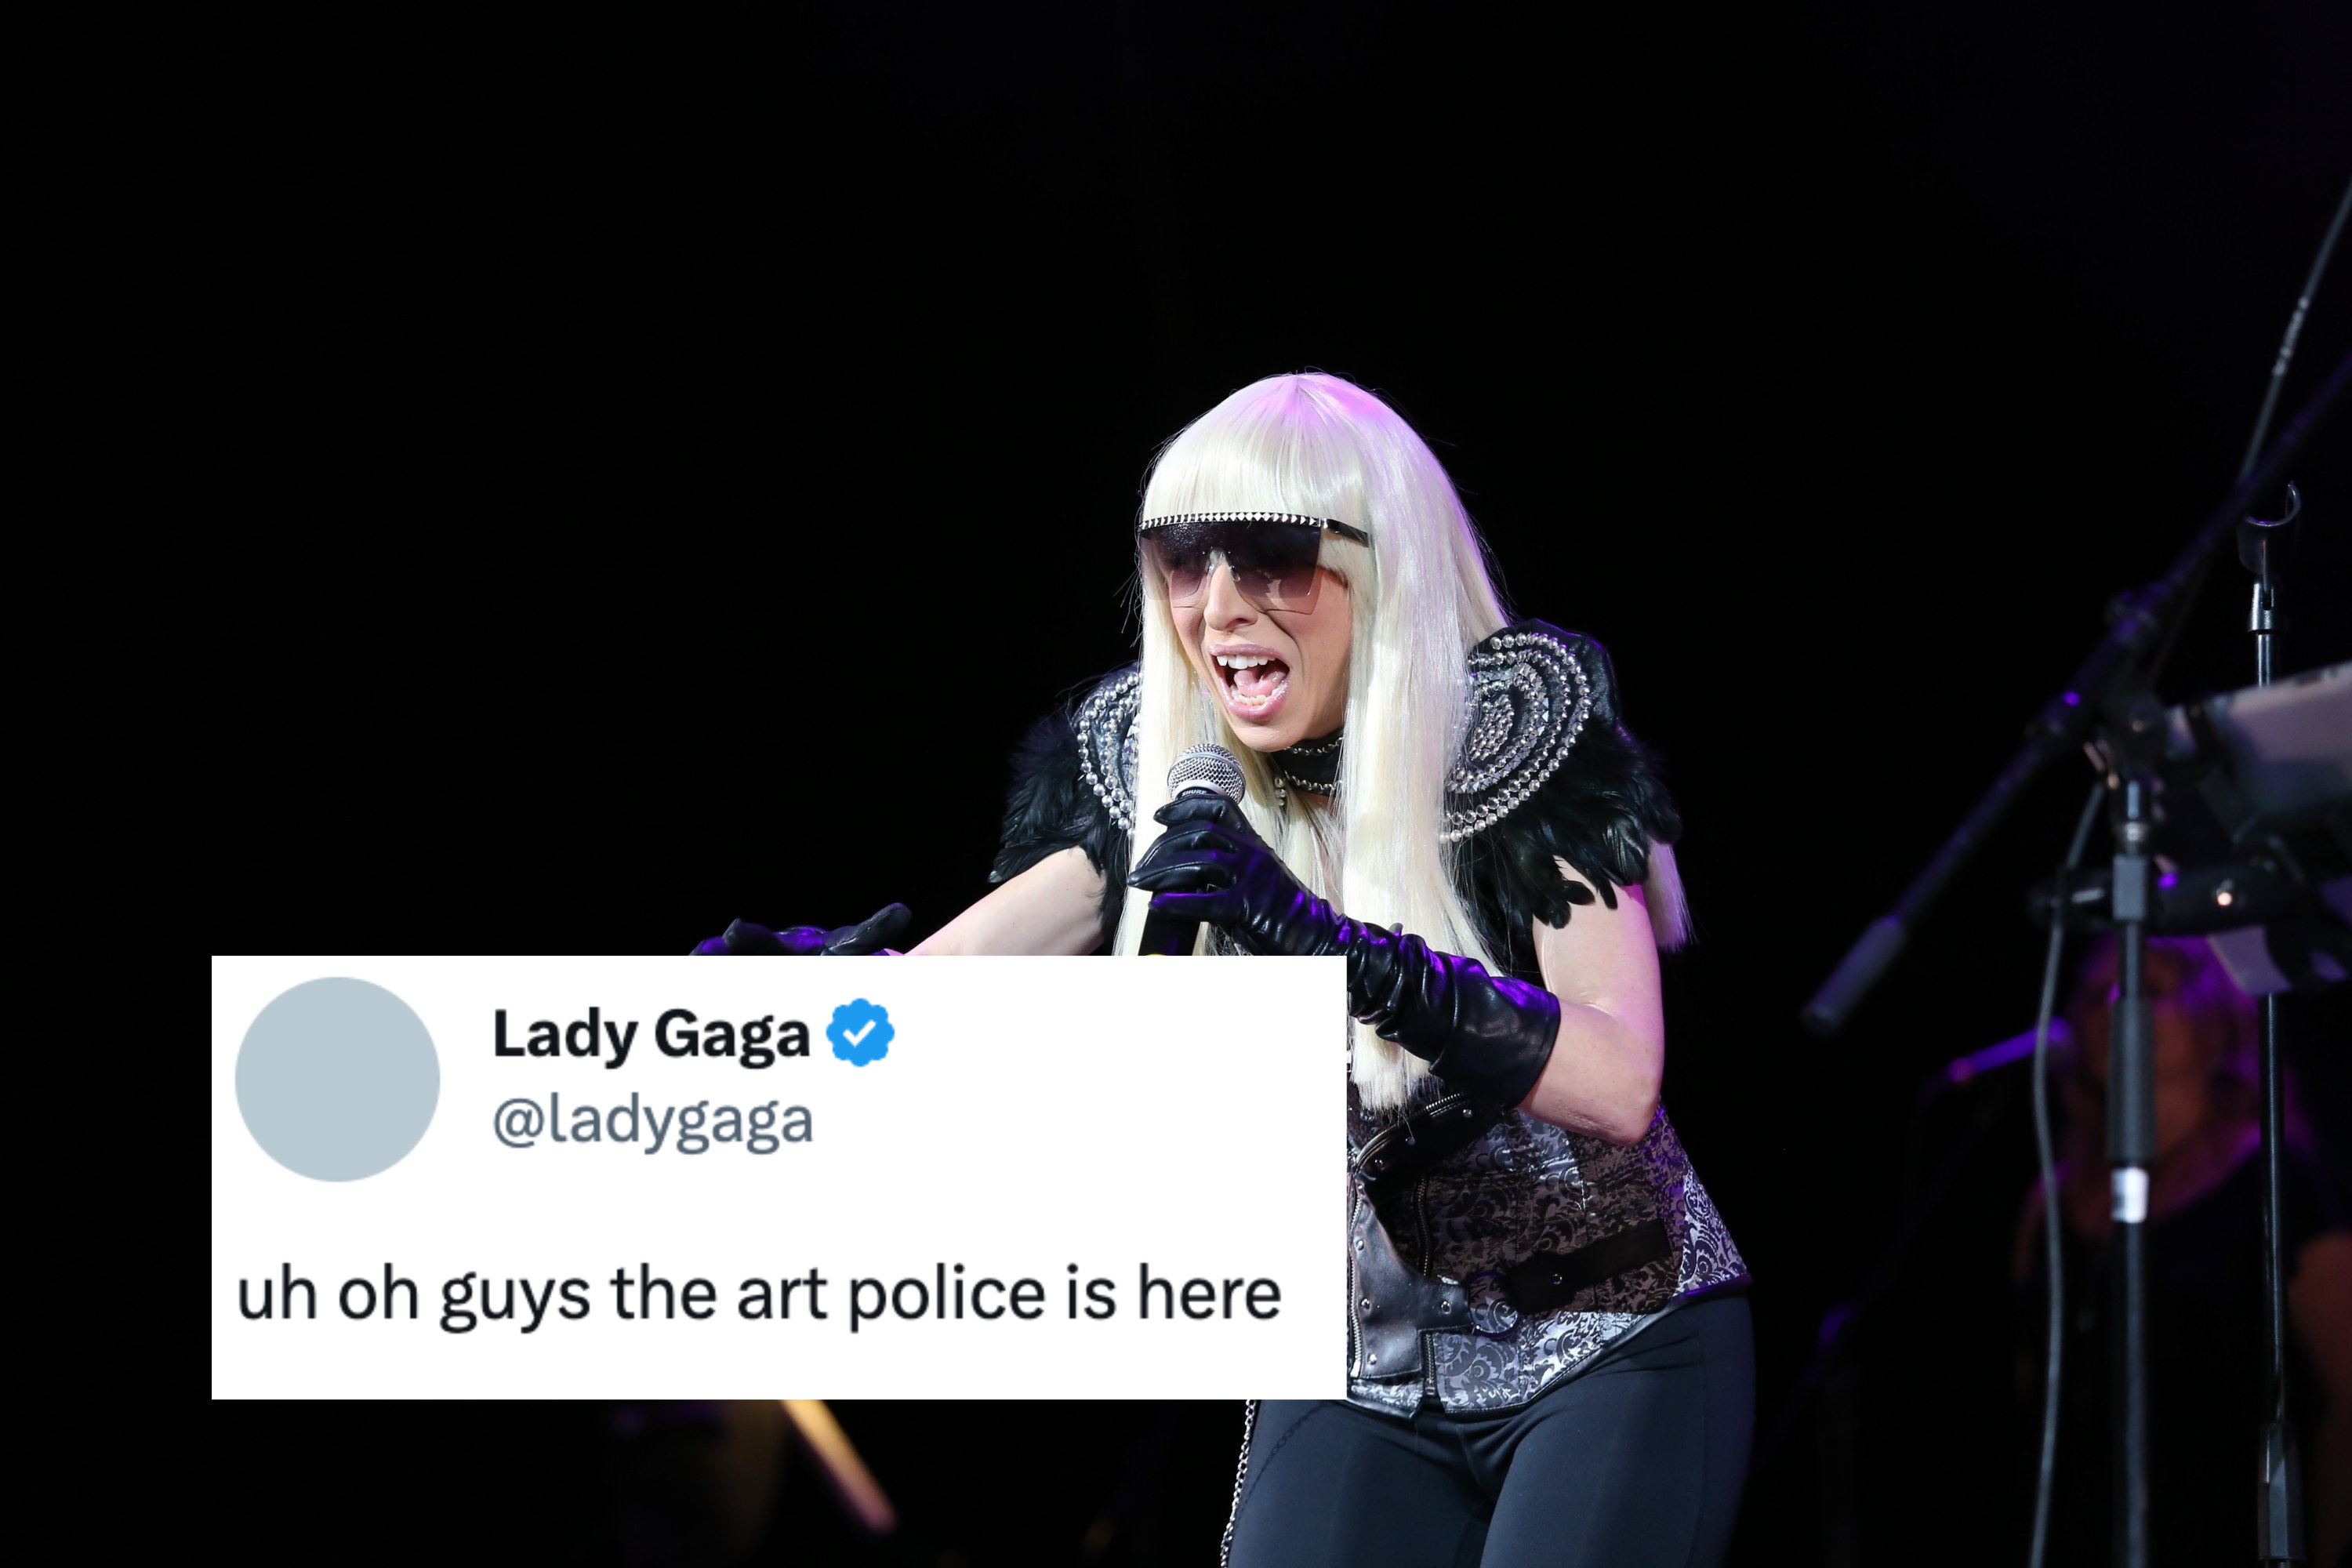 Lady Gaga dressed in black with sunglasses performing on stage, with a screenshot of her tweet &#x27;uh oh guys the art police is here&#x27;